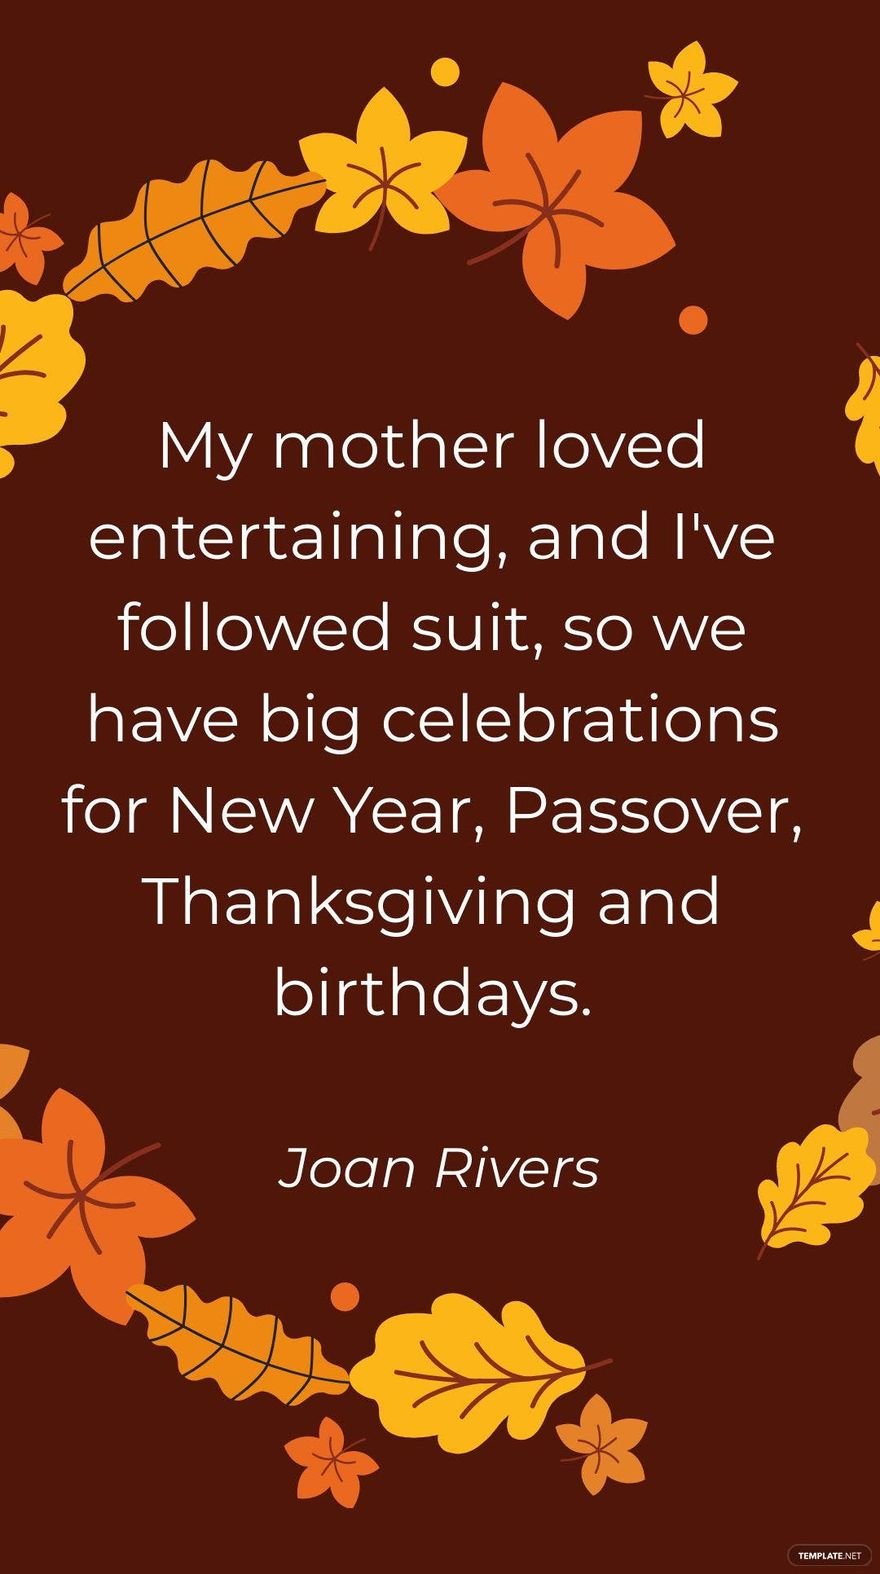 Free Joan Rivers - My mother loved entertaining, and I've followed suit, so we have big celebrations for New Year, Passover, Thanksgiving and birthdays.